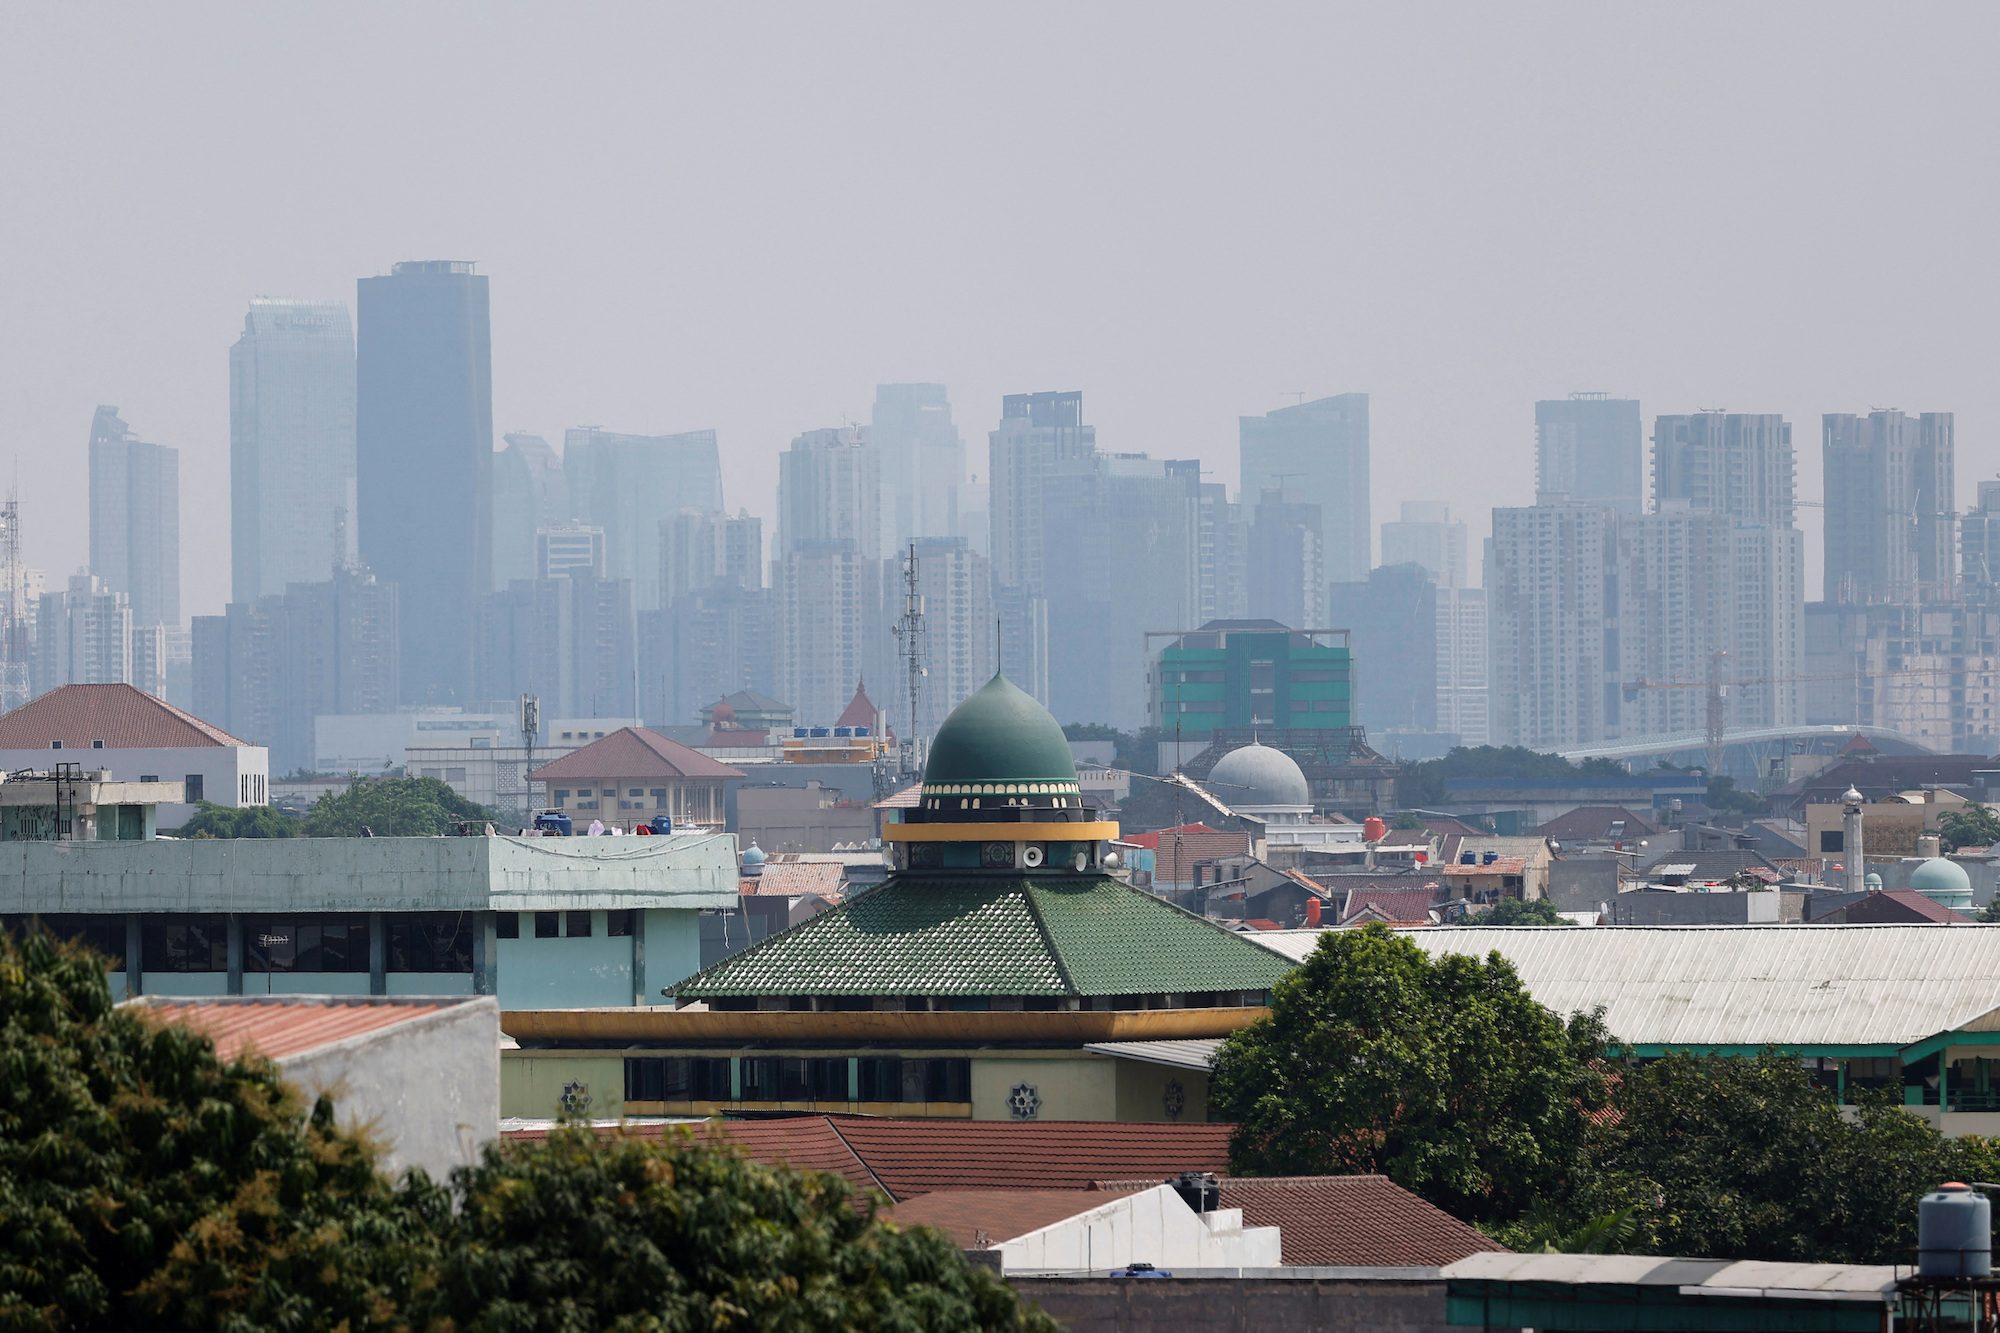 Indonesia’s capital named world’s most polluted city